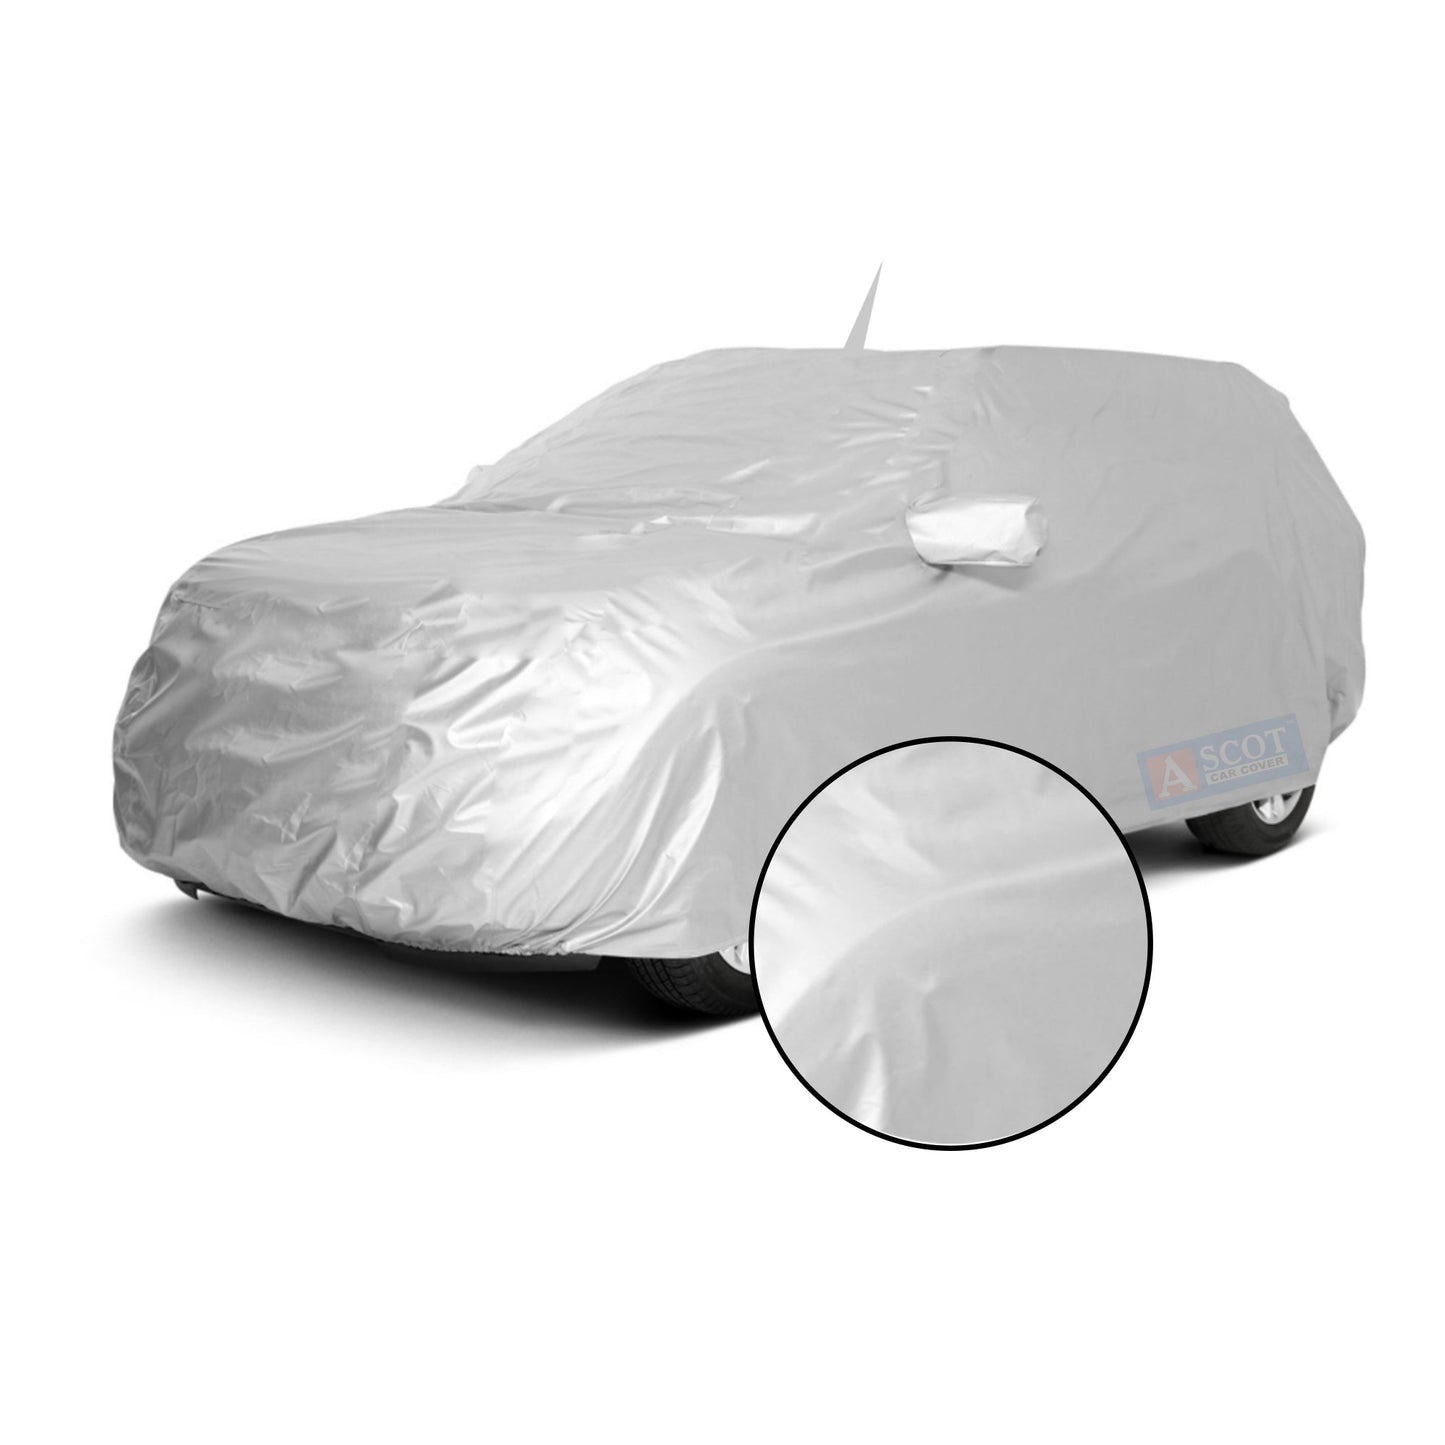 Ascot Toyota Glanza Car Body Cover Dust Proof, Trippel Stitched